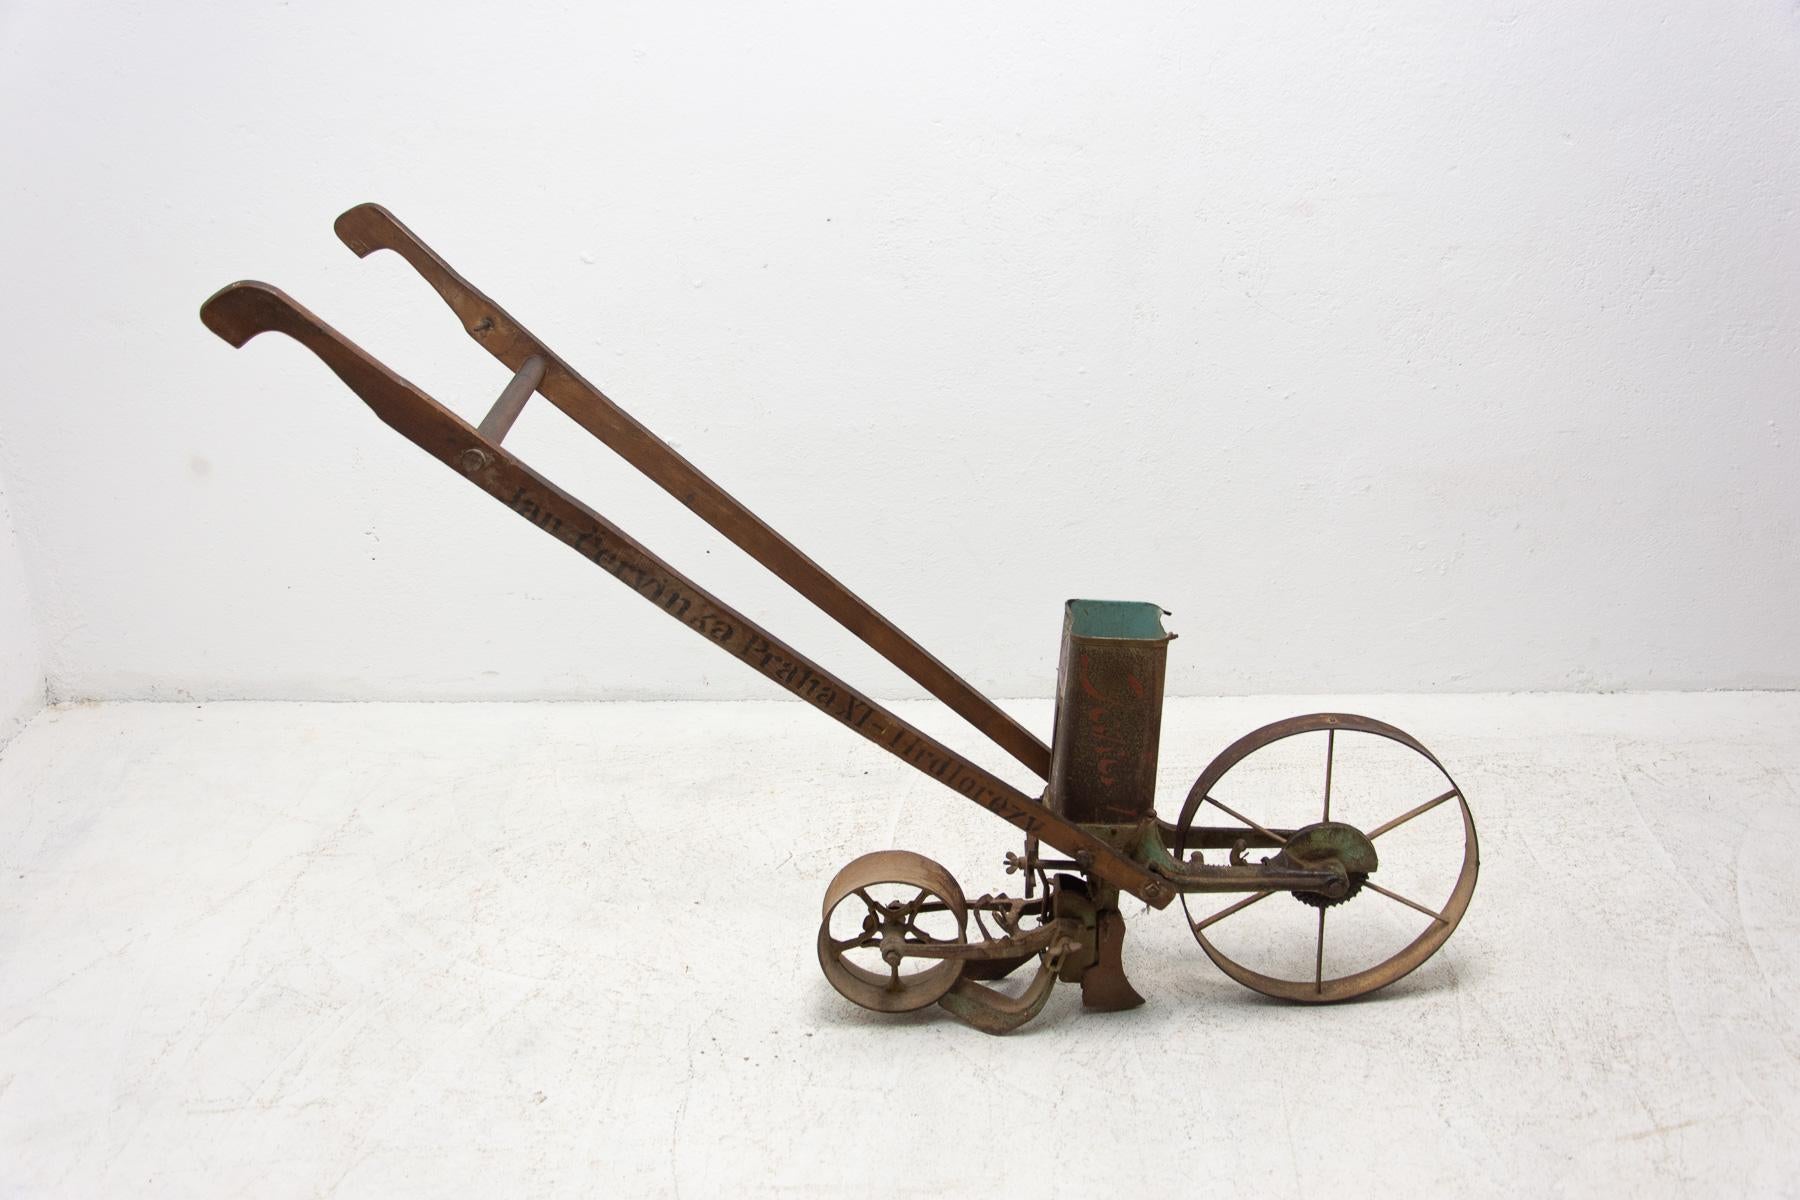 Vintage manual single – row sowing machine for corn, beets, poppies and others. Material: iron. Made in the former Austria Hungary in the early 20th Century. Very nice decoration.

Measures: Height: 101 cm

Width: 154 cm

Depth: 48 cm.